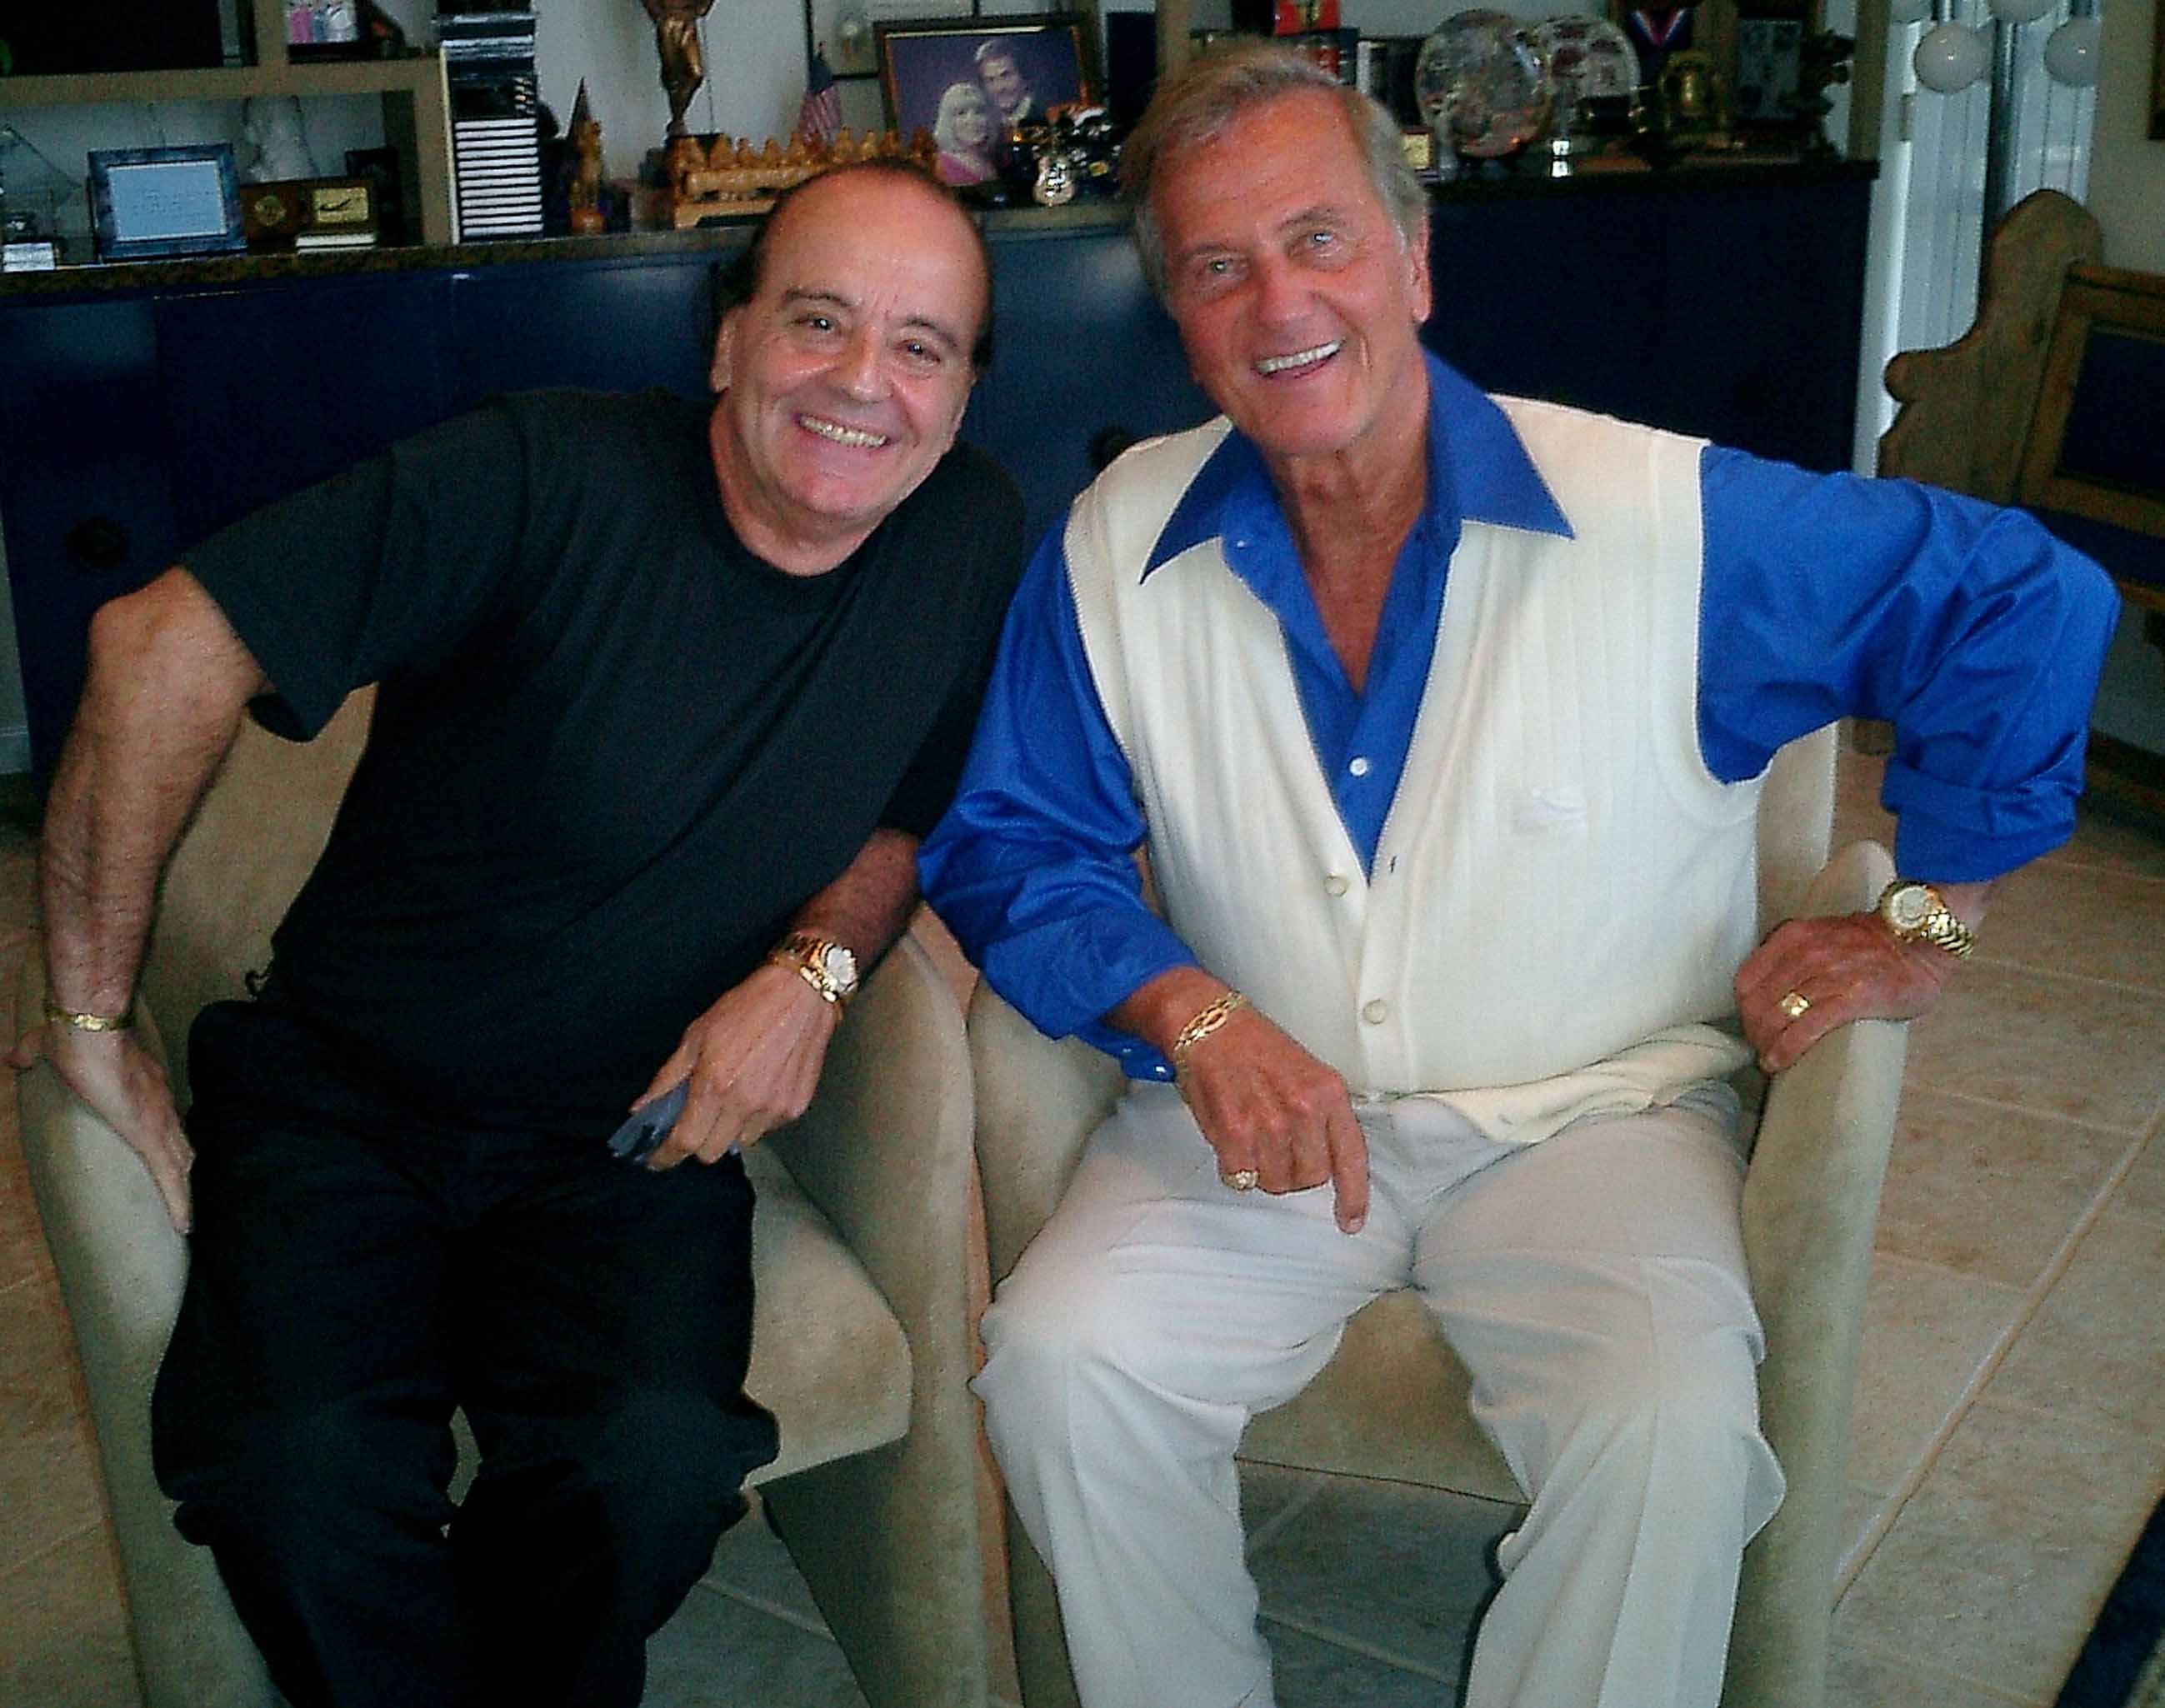 Jorg Bobsin and PAT BOONE for 